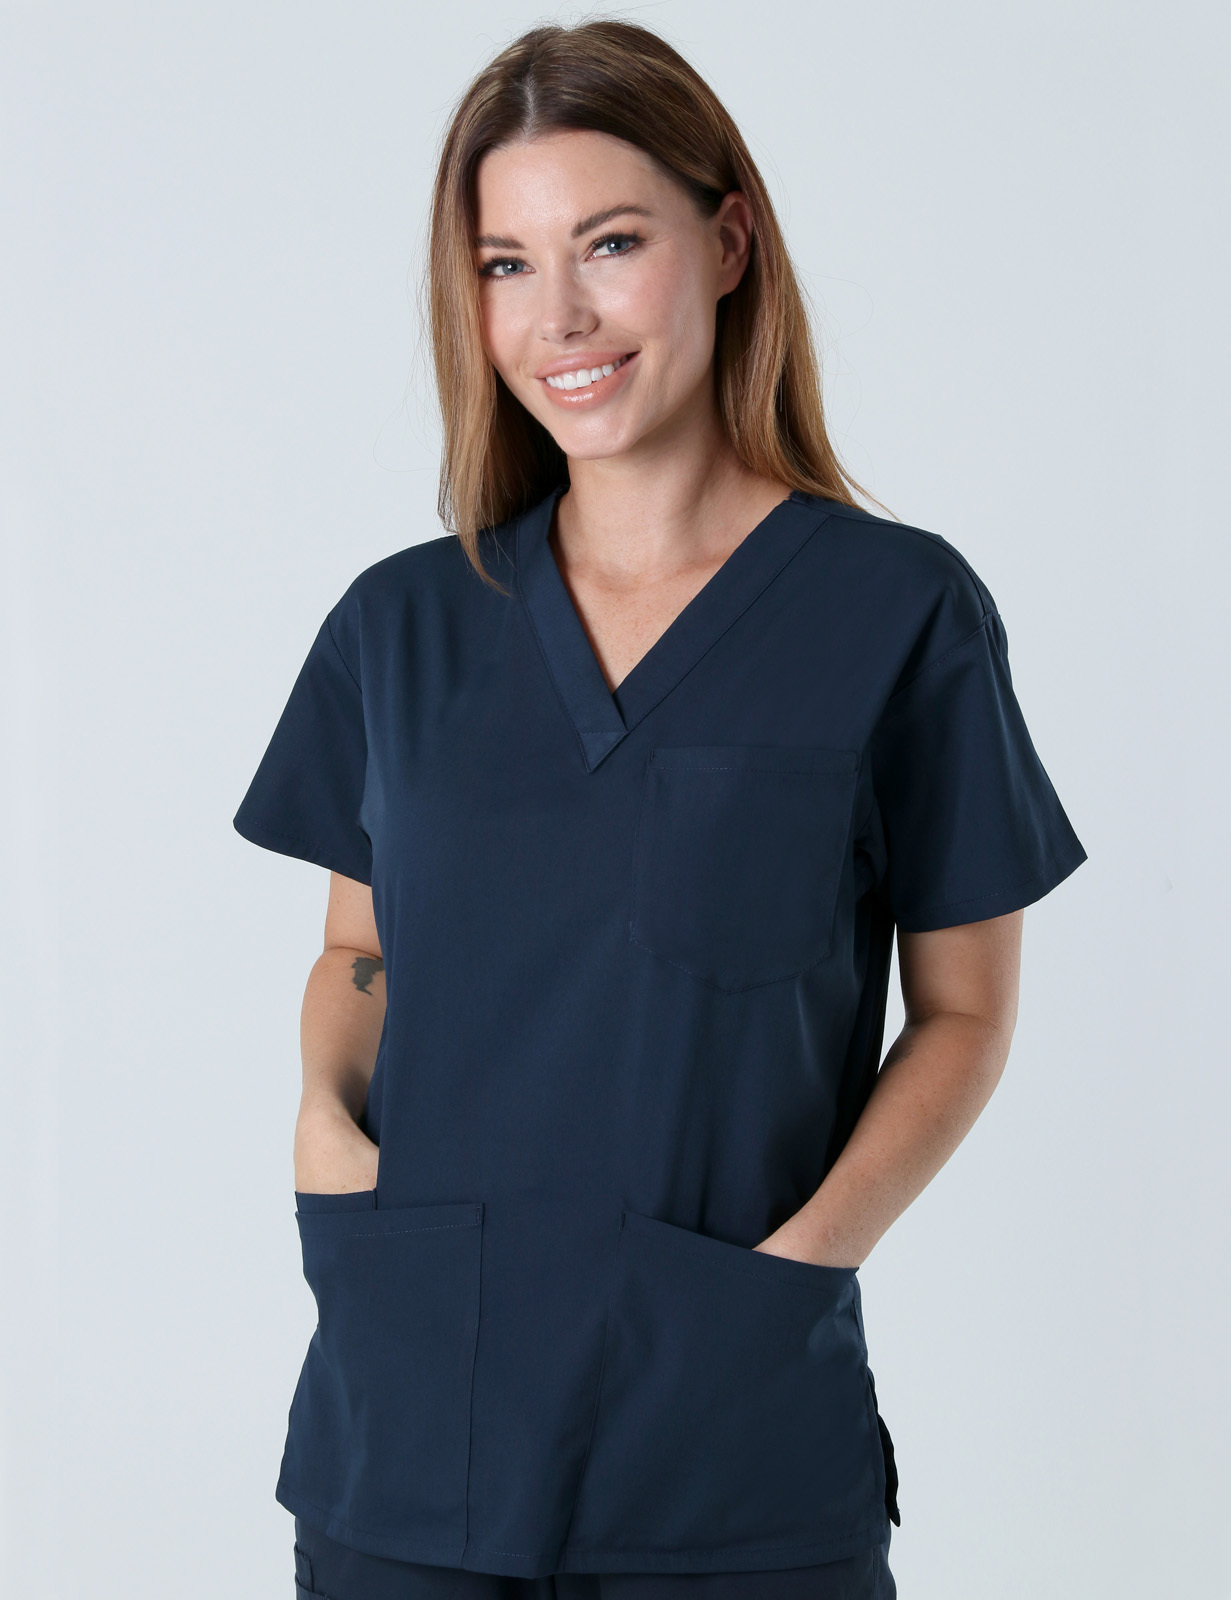 Regional Queensland Clinical Nurse Consultant (4 Pocket Top and Cargo Pants in Navy incl Logos) 